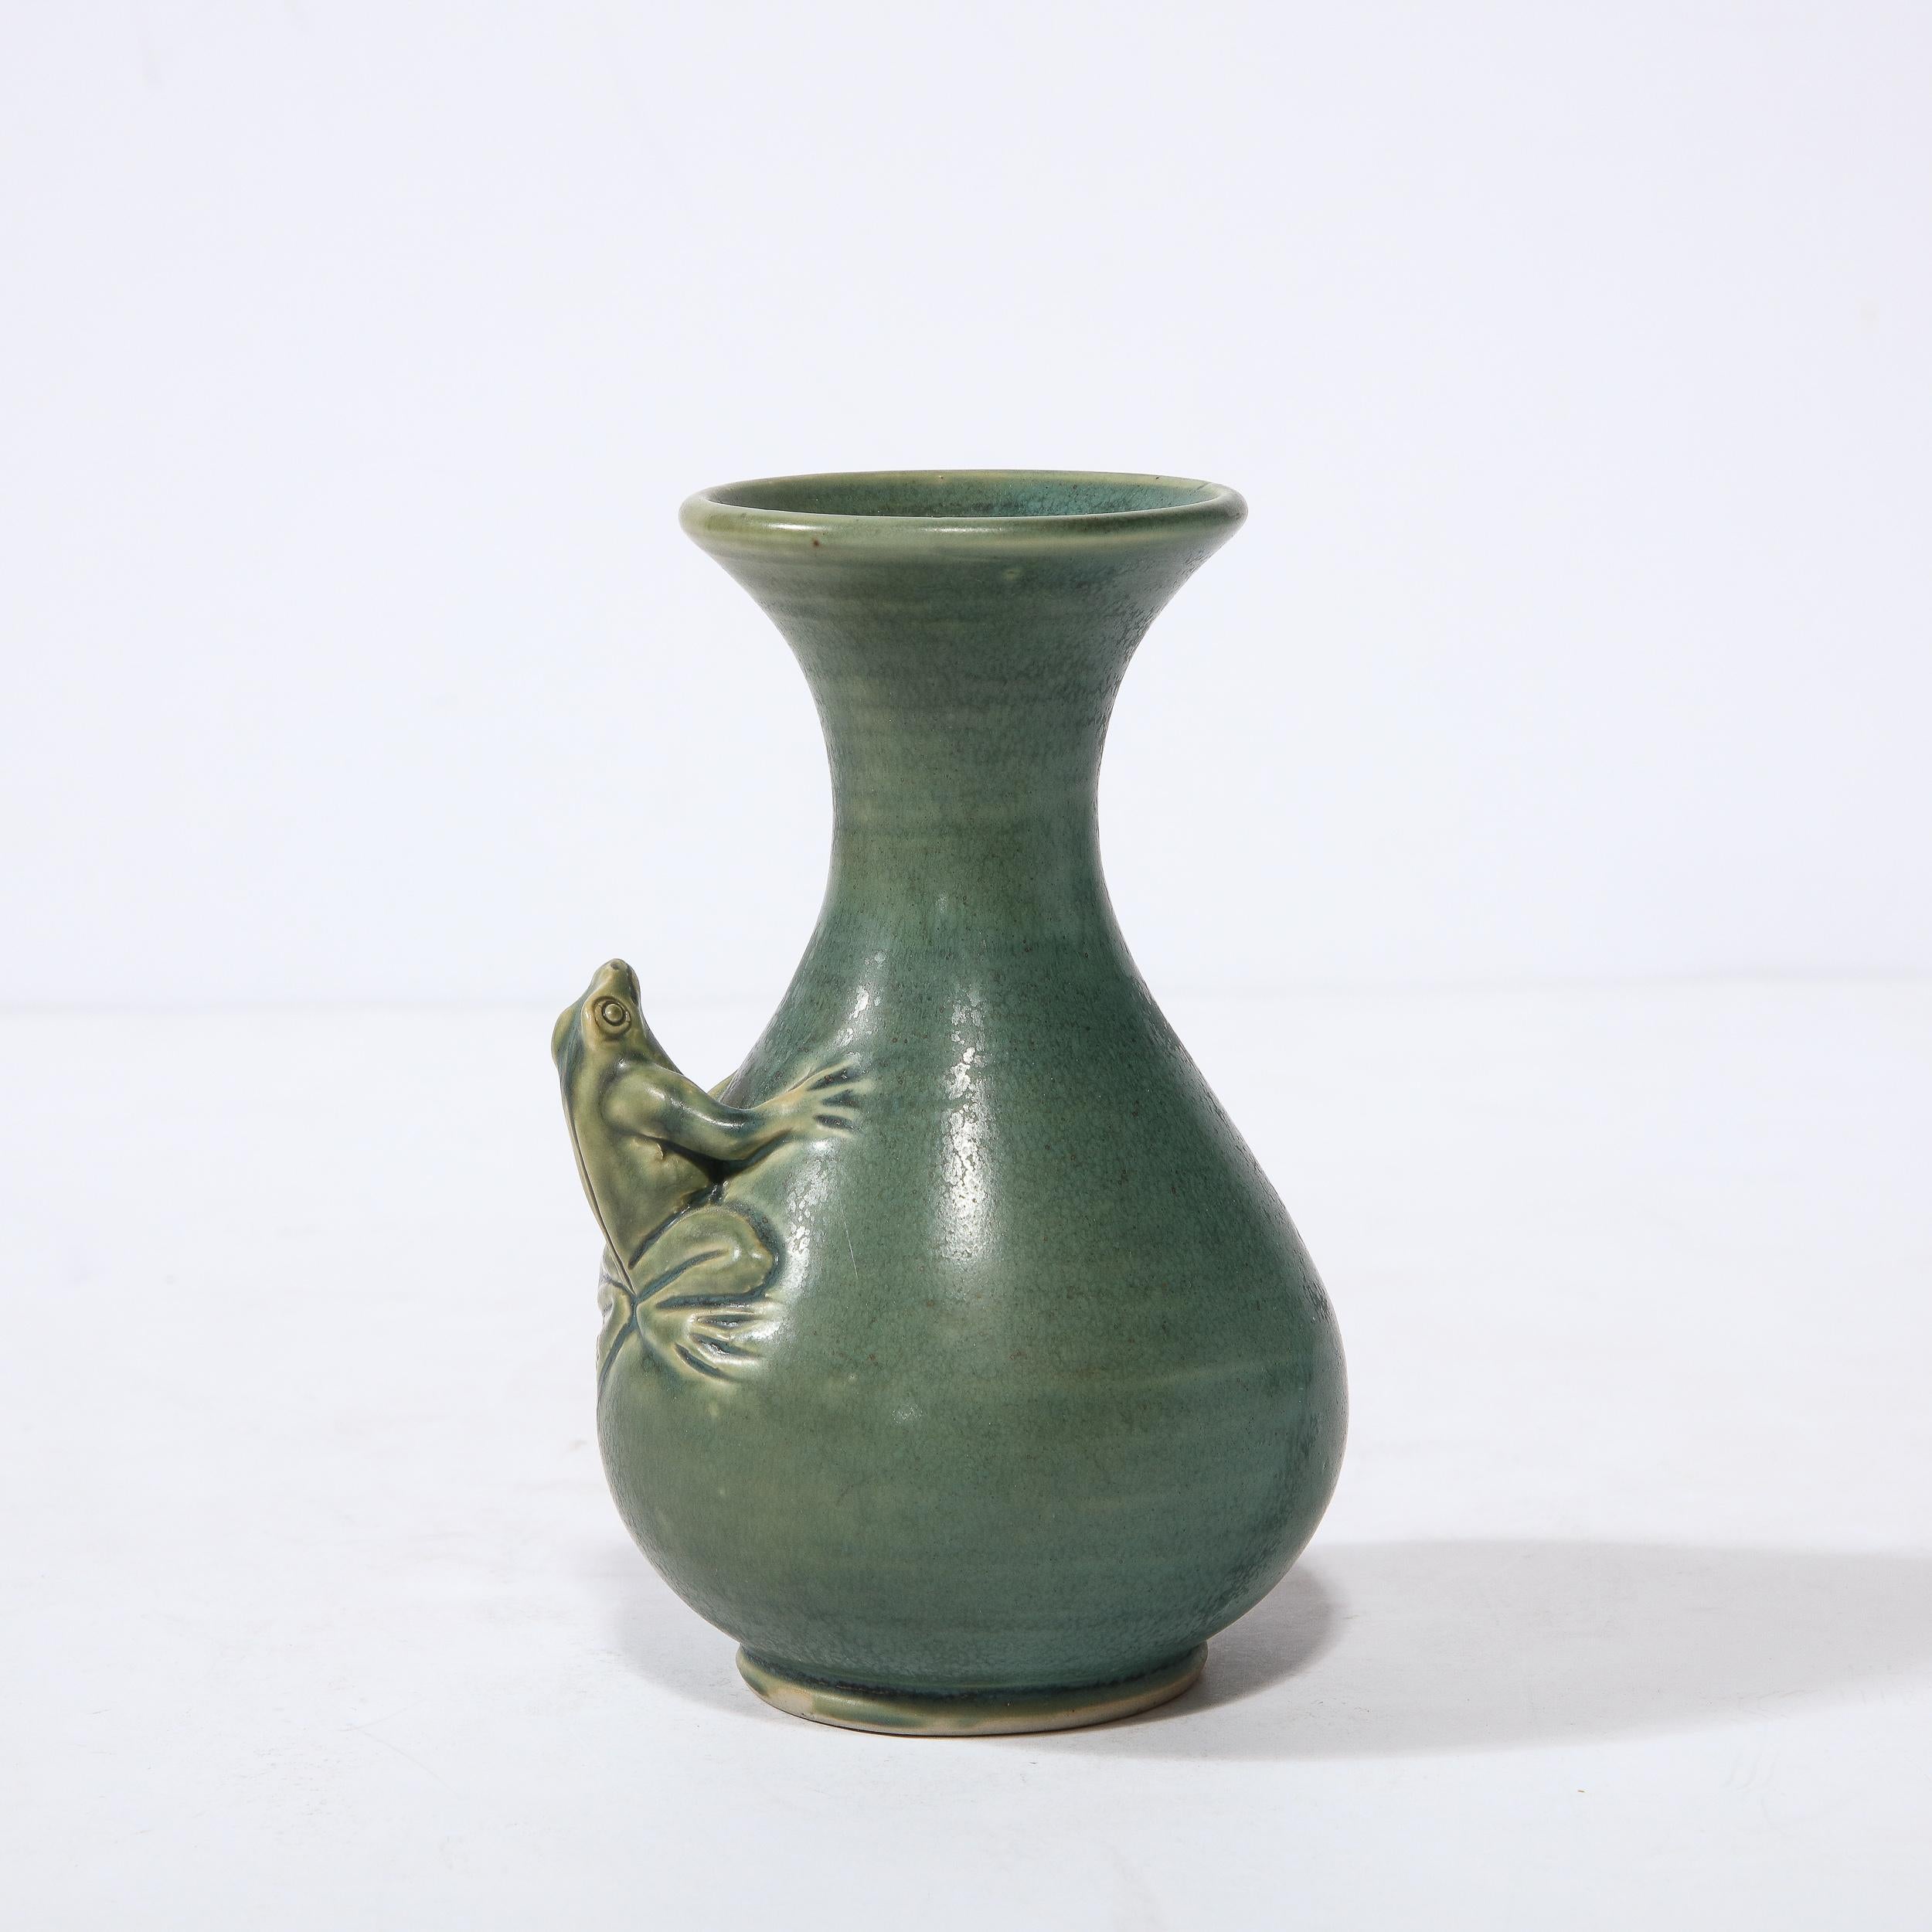 20th Century Modernist Sculptural Muted Jade Glazed Ceramic Vase with Frog Motif in Relief For Sale